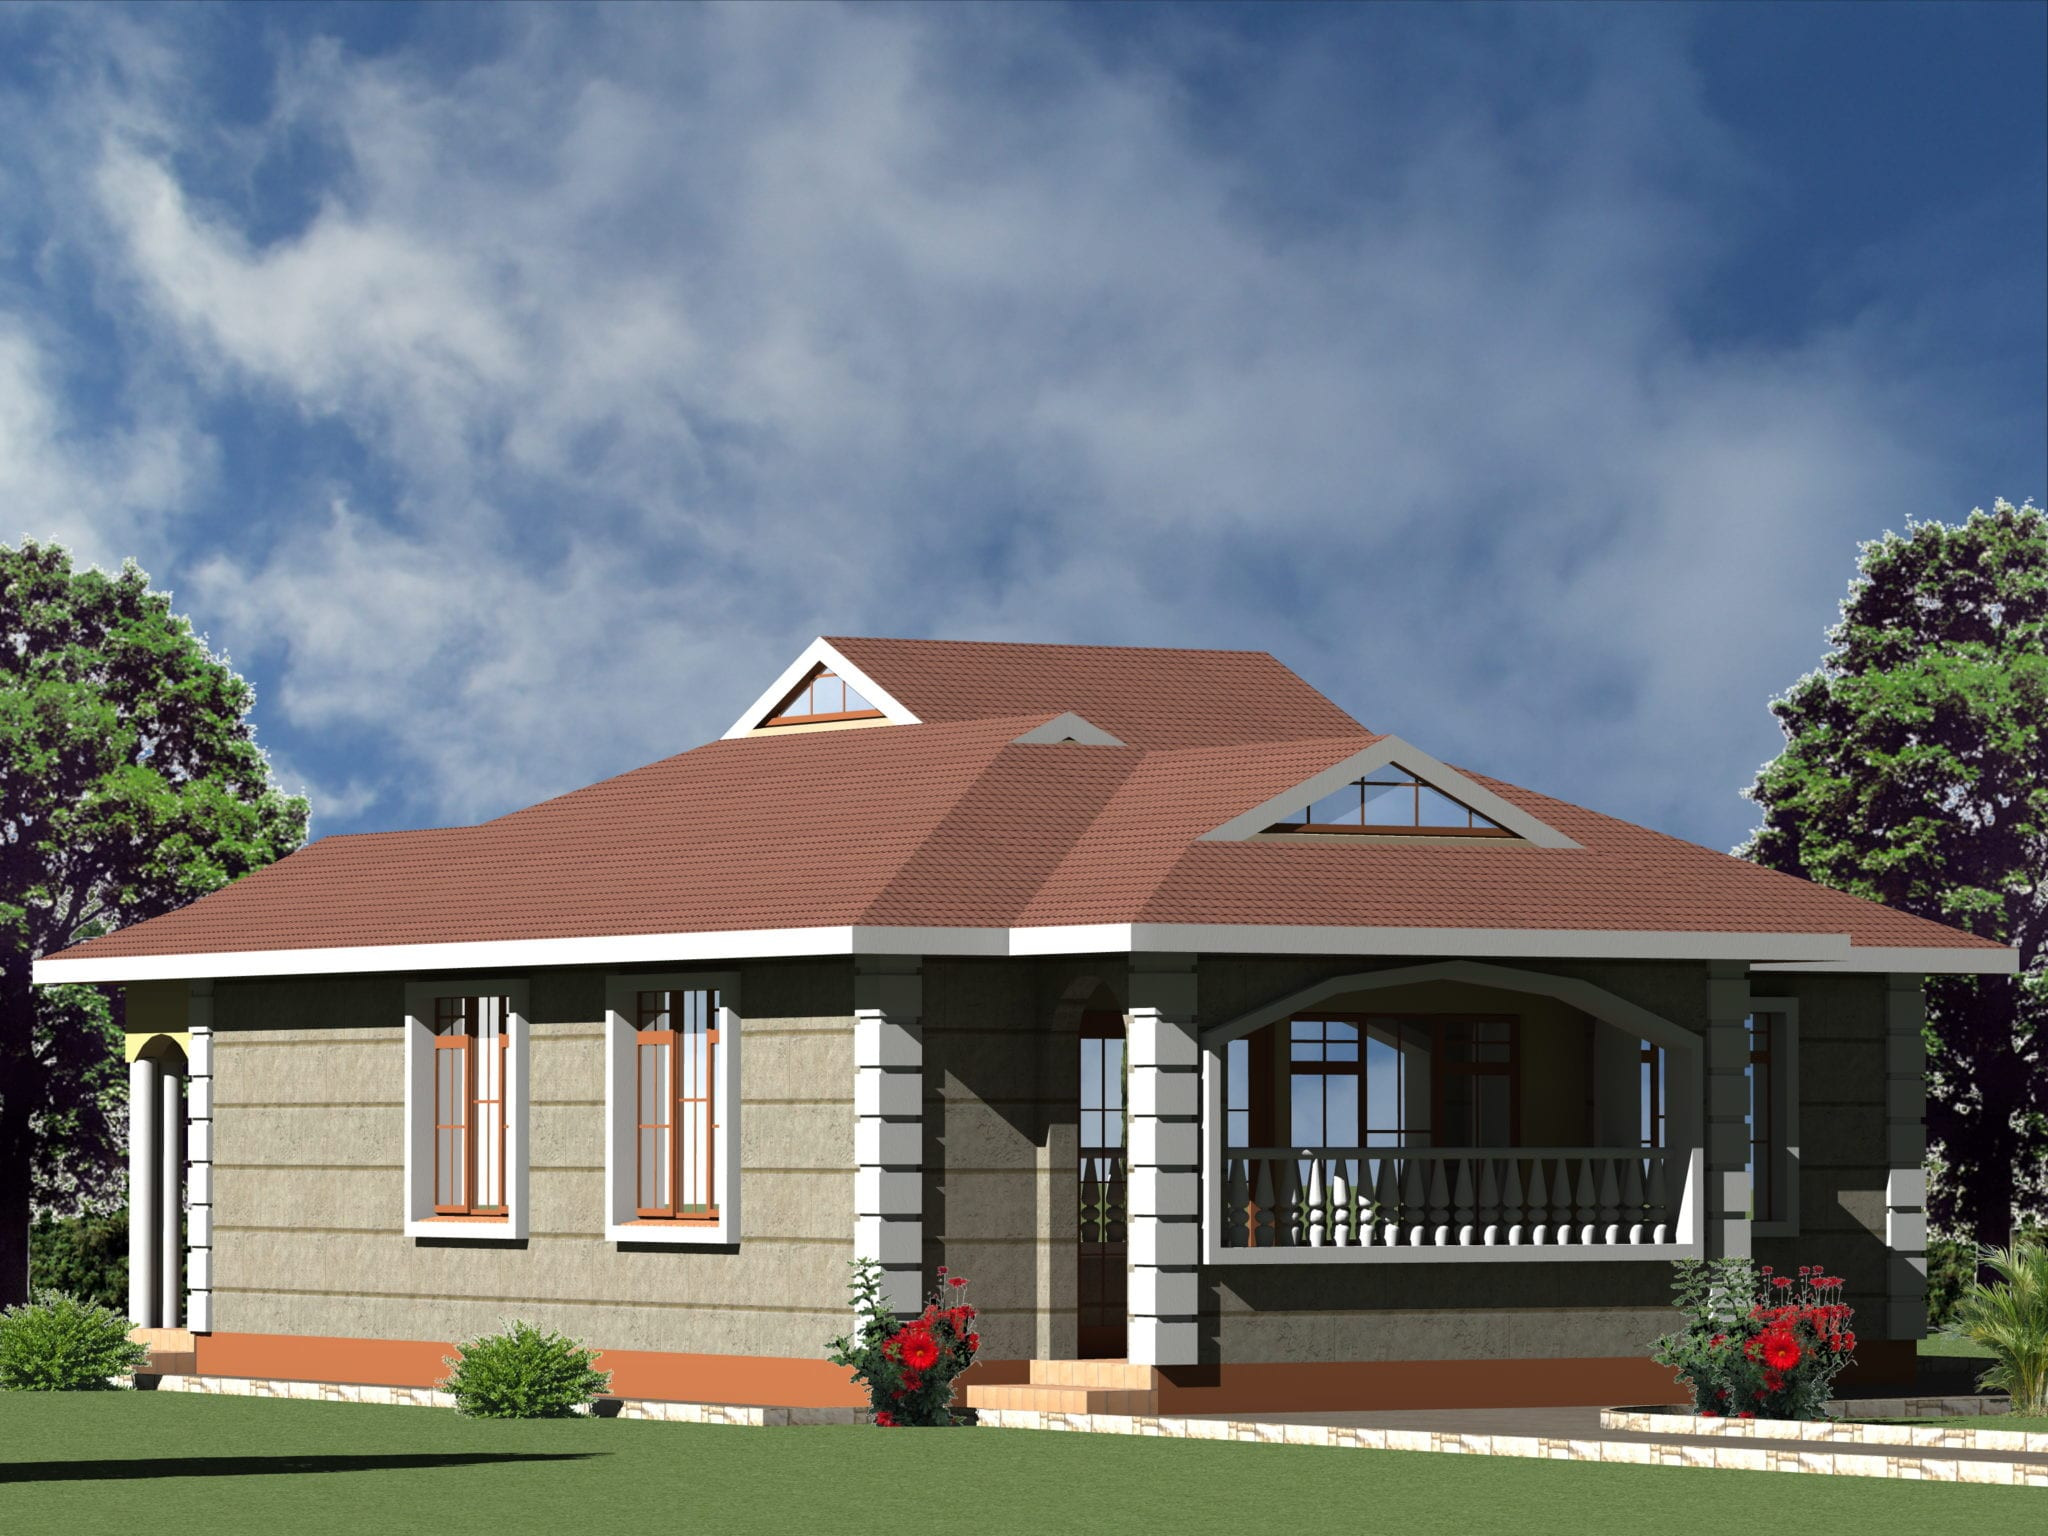 Small 3 Bedroom House
 Simple & Small 3 bedroom house plan